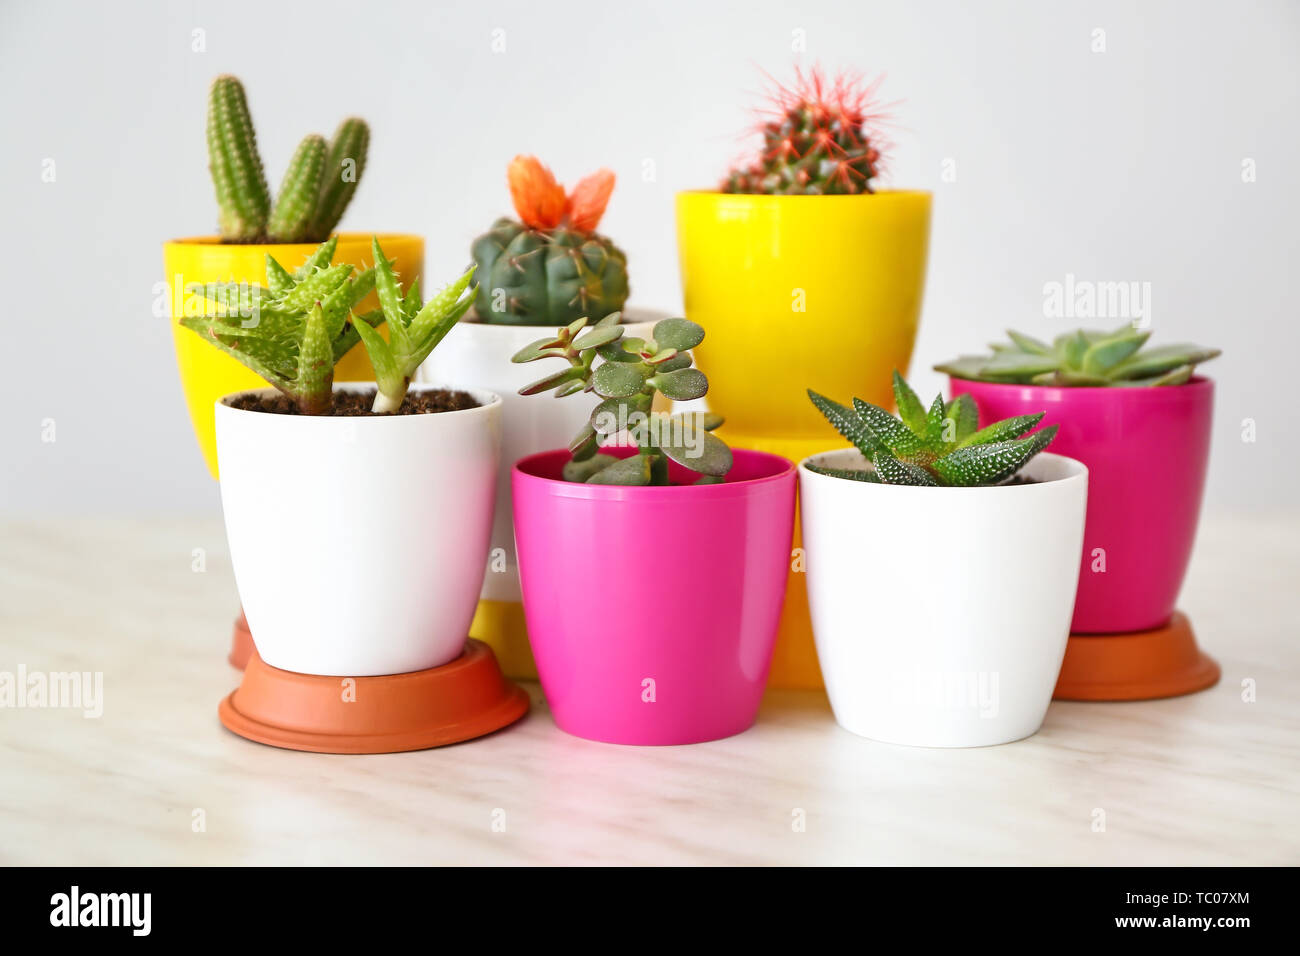 Pots with succulents and cacti on table against light background Stock Photo